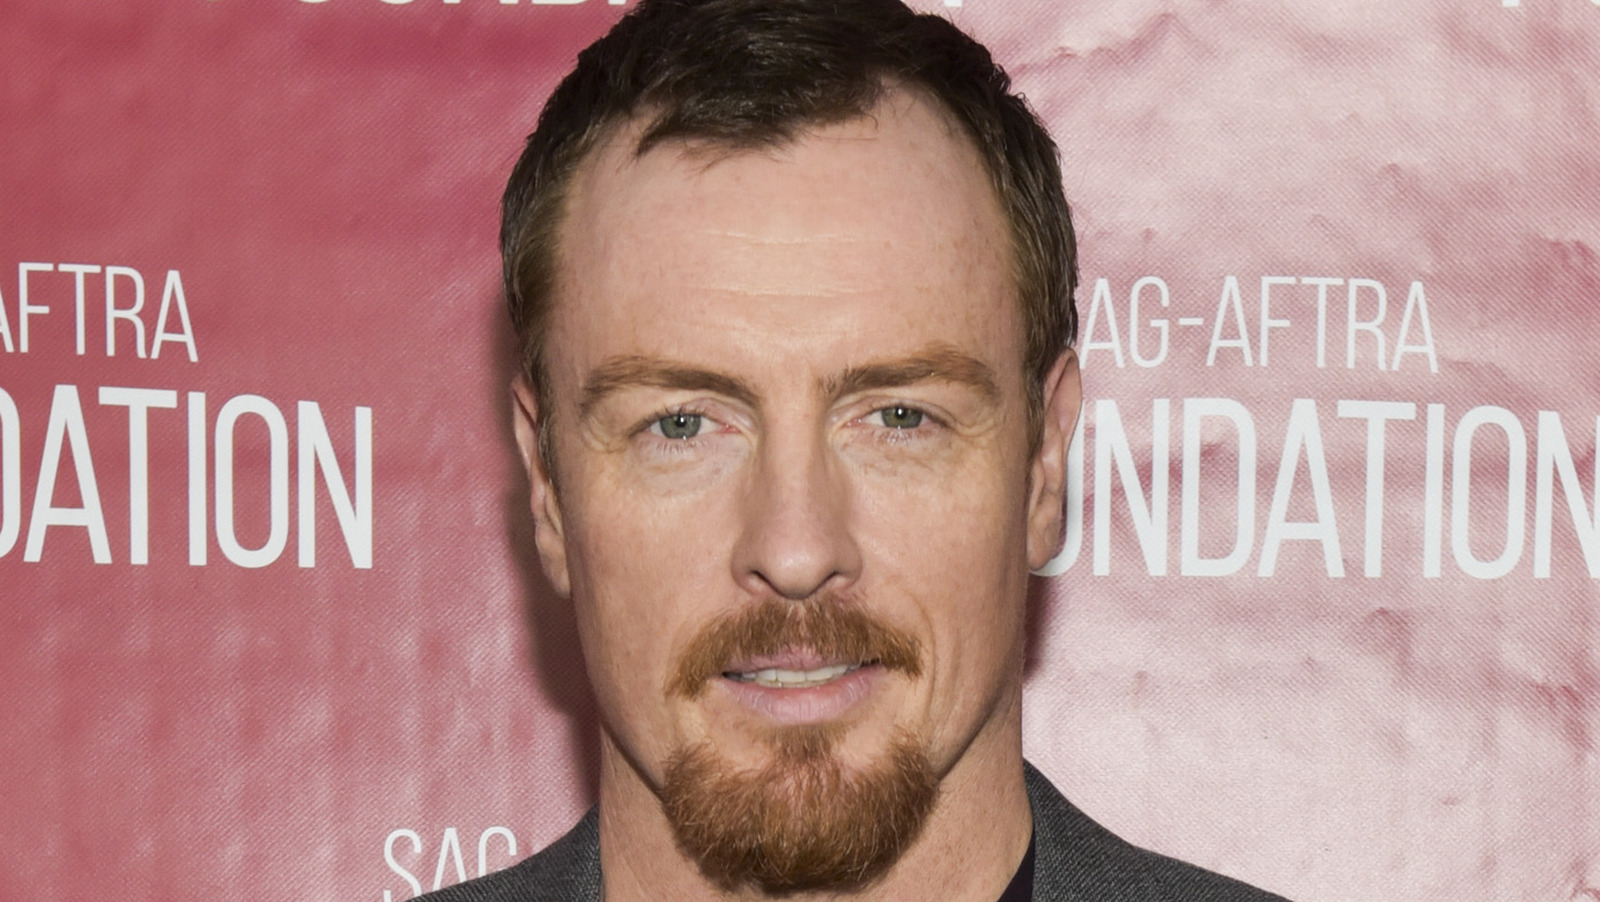 Toby Stephens, actor – portrait of the artist, Theatre